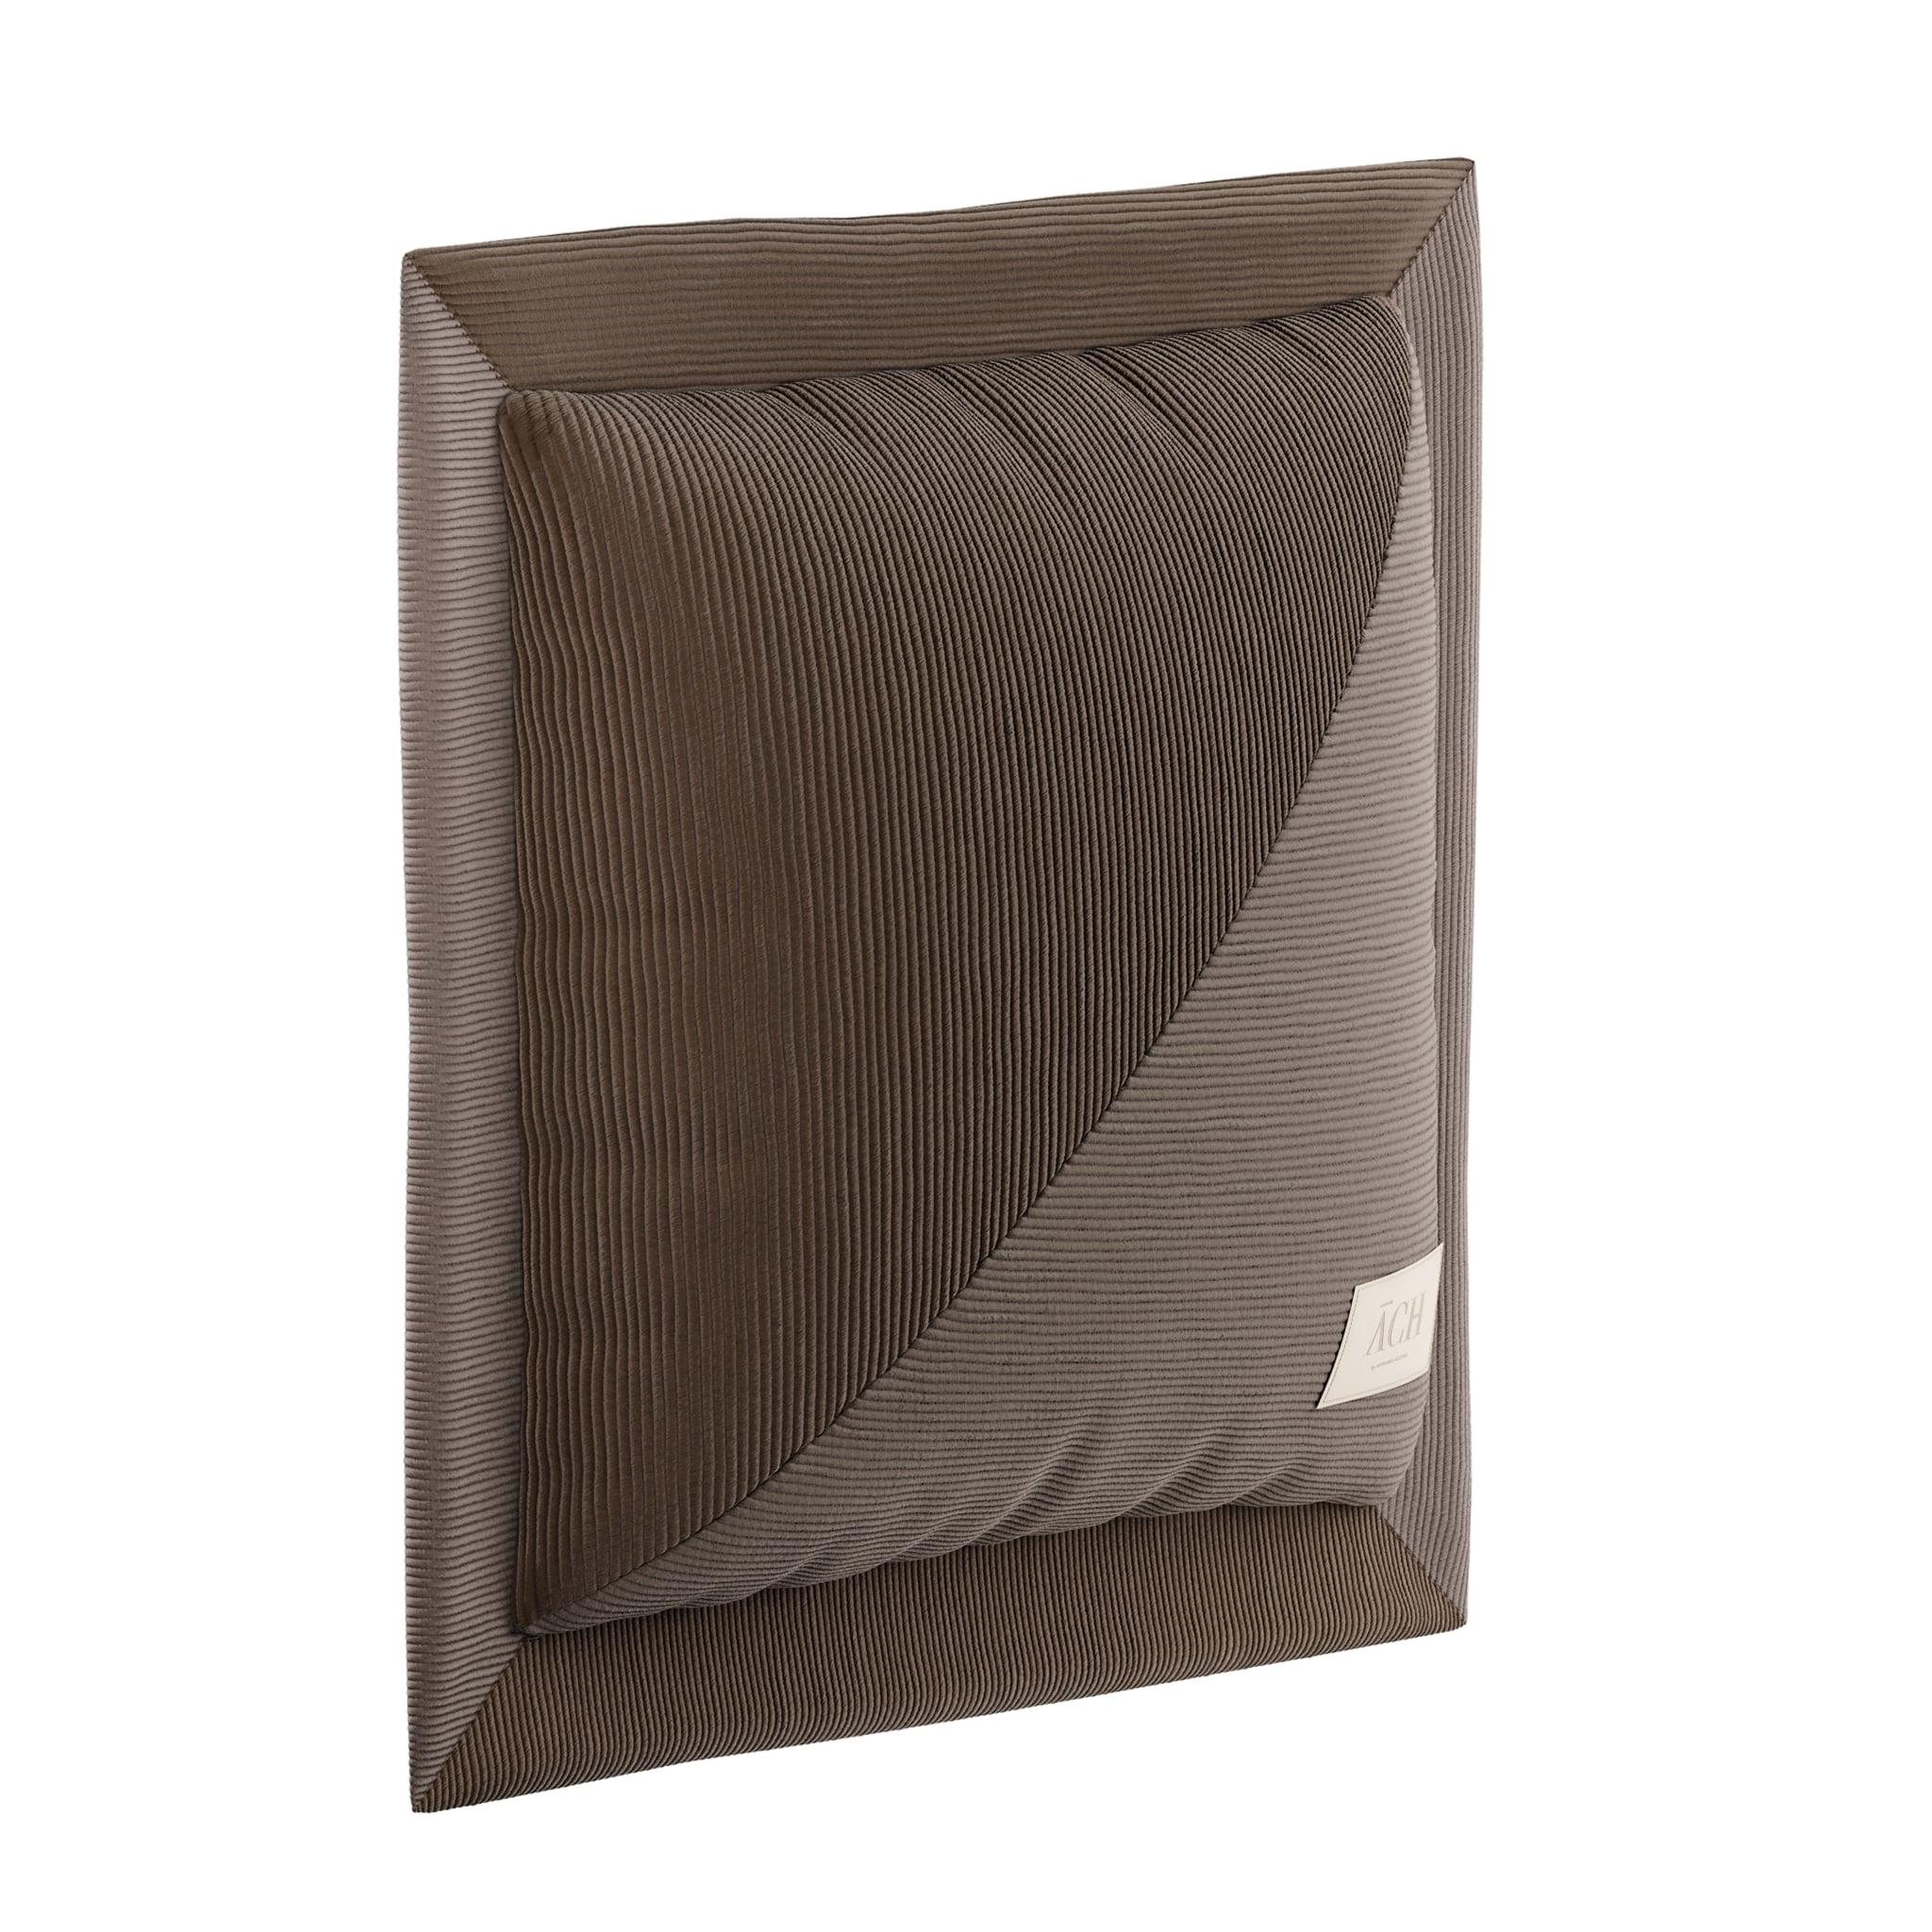 Brown Corduroy Decorative Throw Pillow, Luxury Modern Chocolate Cushion 23''
Chocolate Taupe Square is a decorative flange pillow with a clever construction of two colors of corduroy, a delicious brown and a sandy taupe. 
This refined and fun